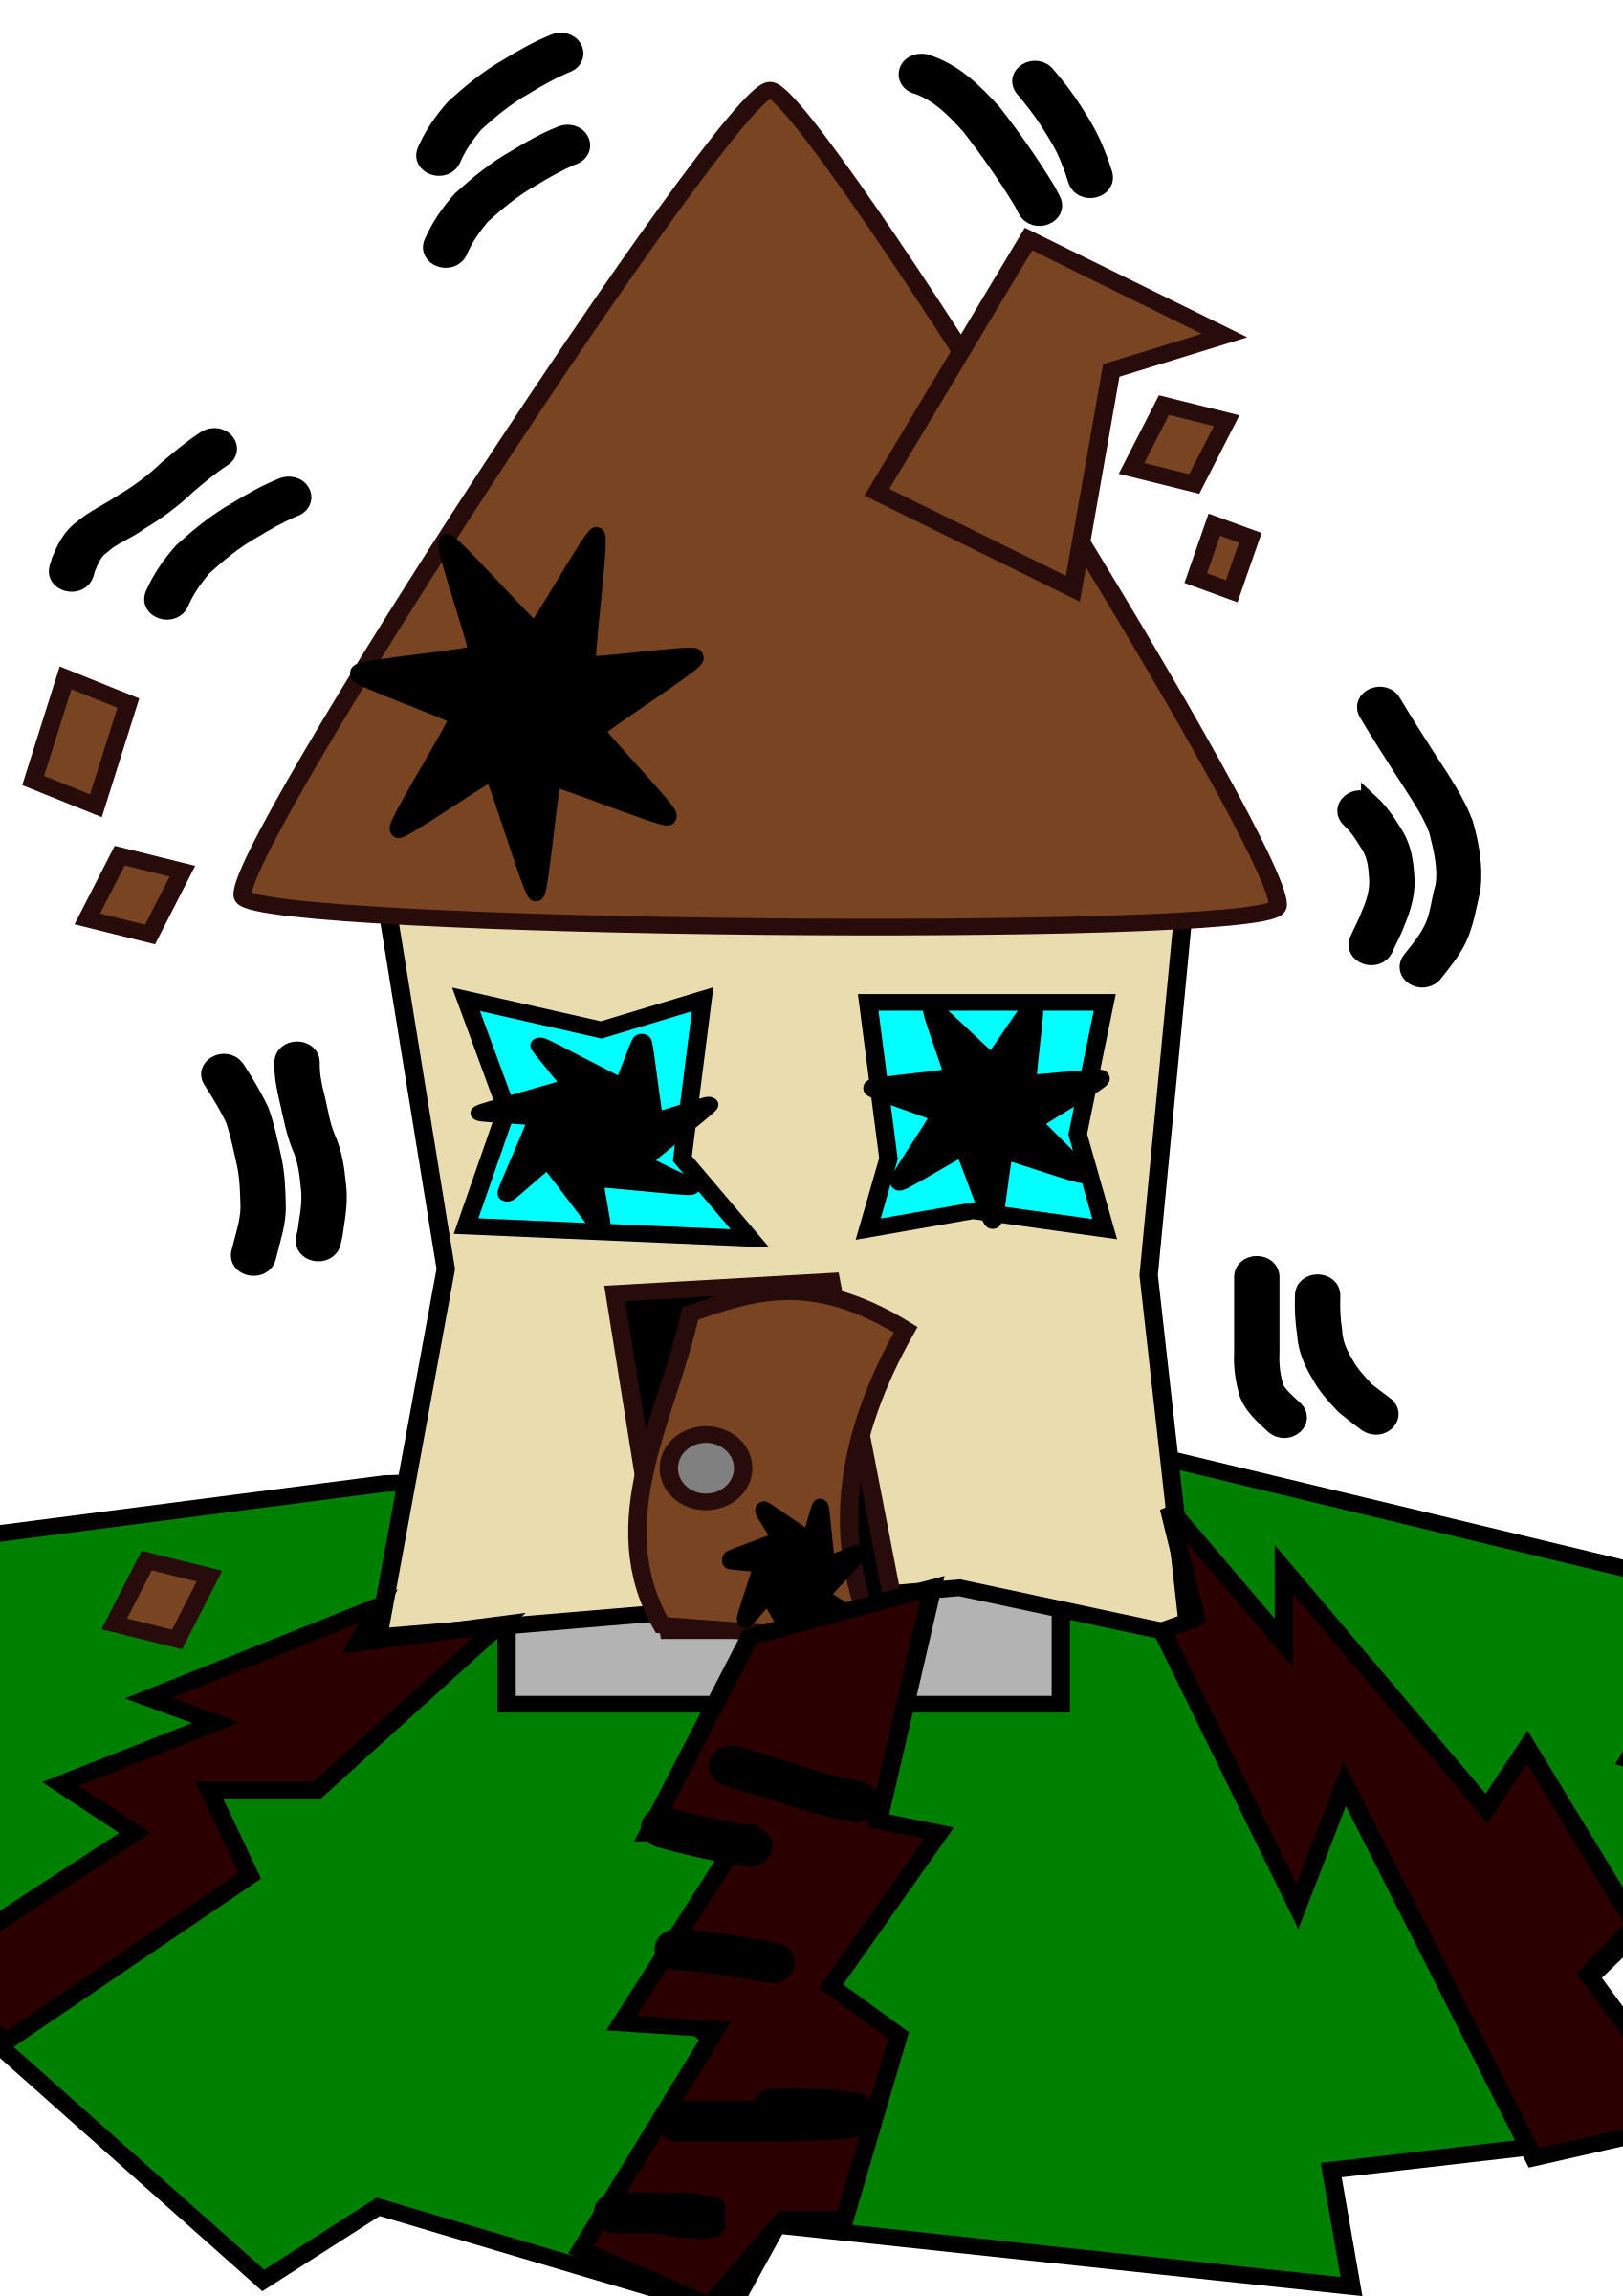 Earthquake clipart dilapidated. With house big image